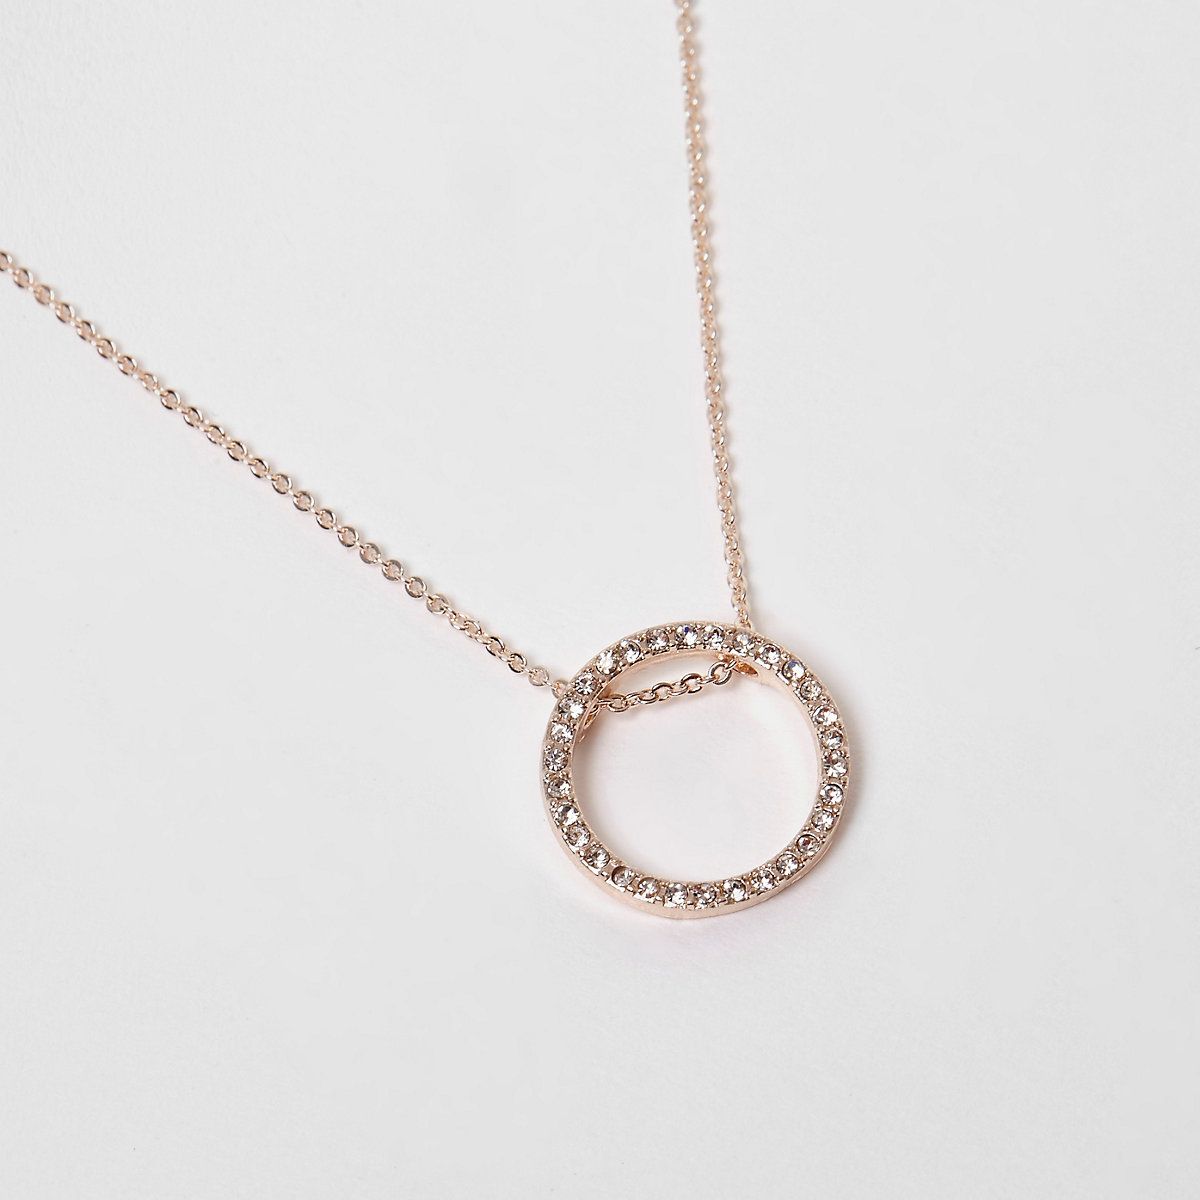 Rose gold tone diamante pave circle necklace | River Island (UK & IE)